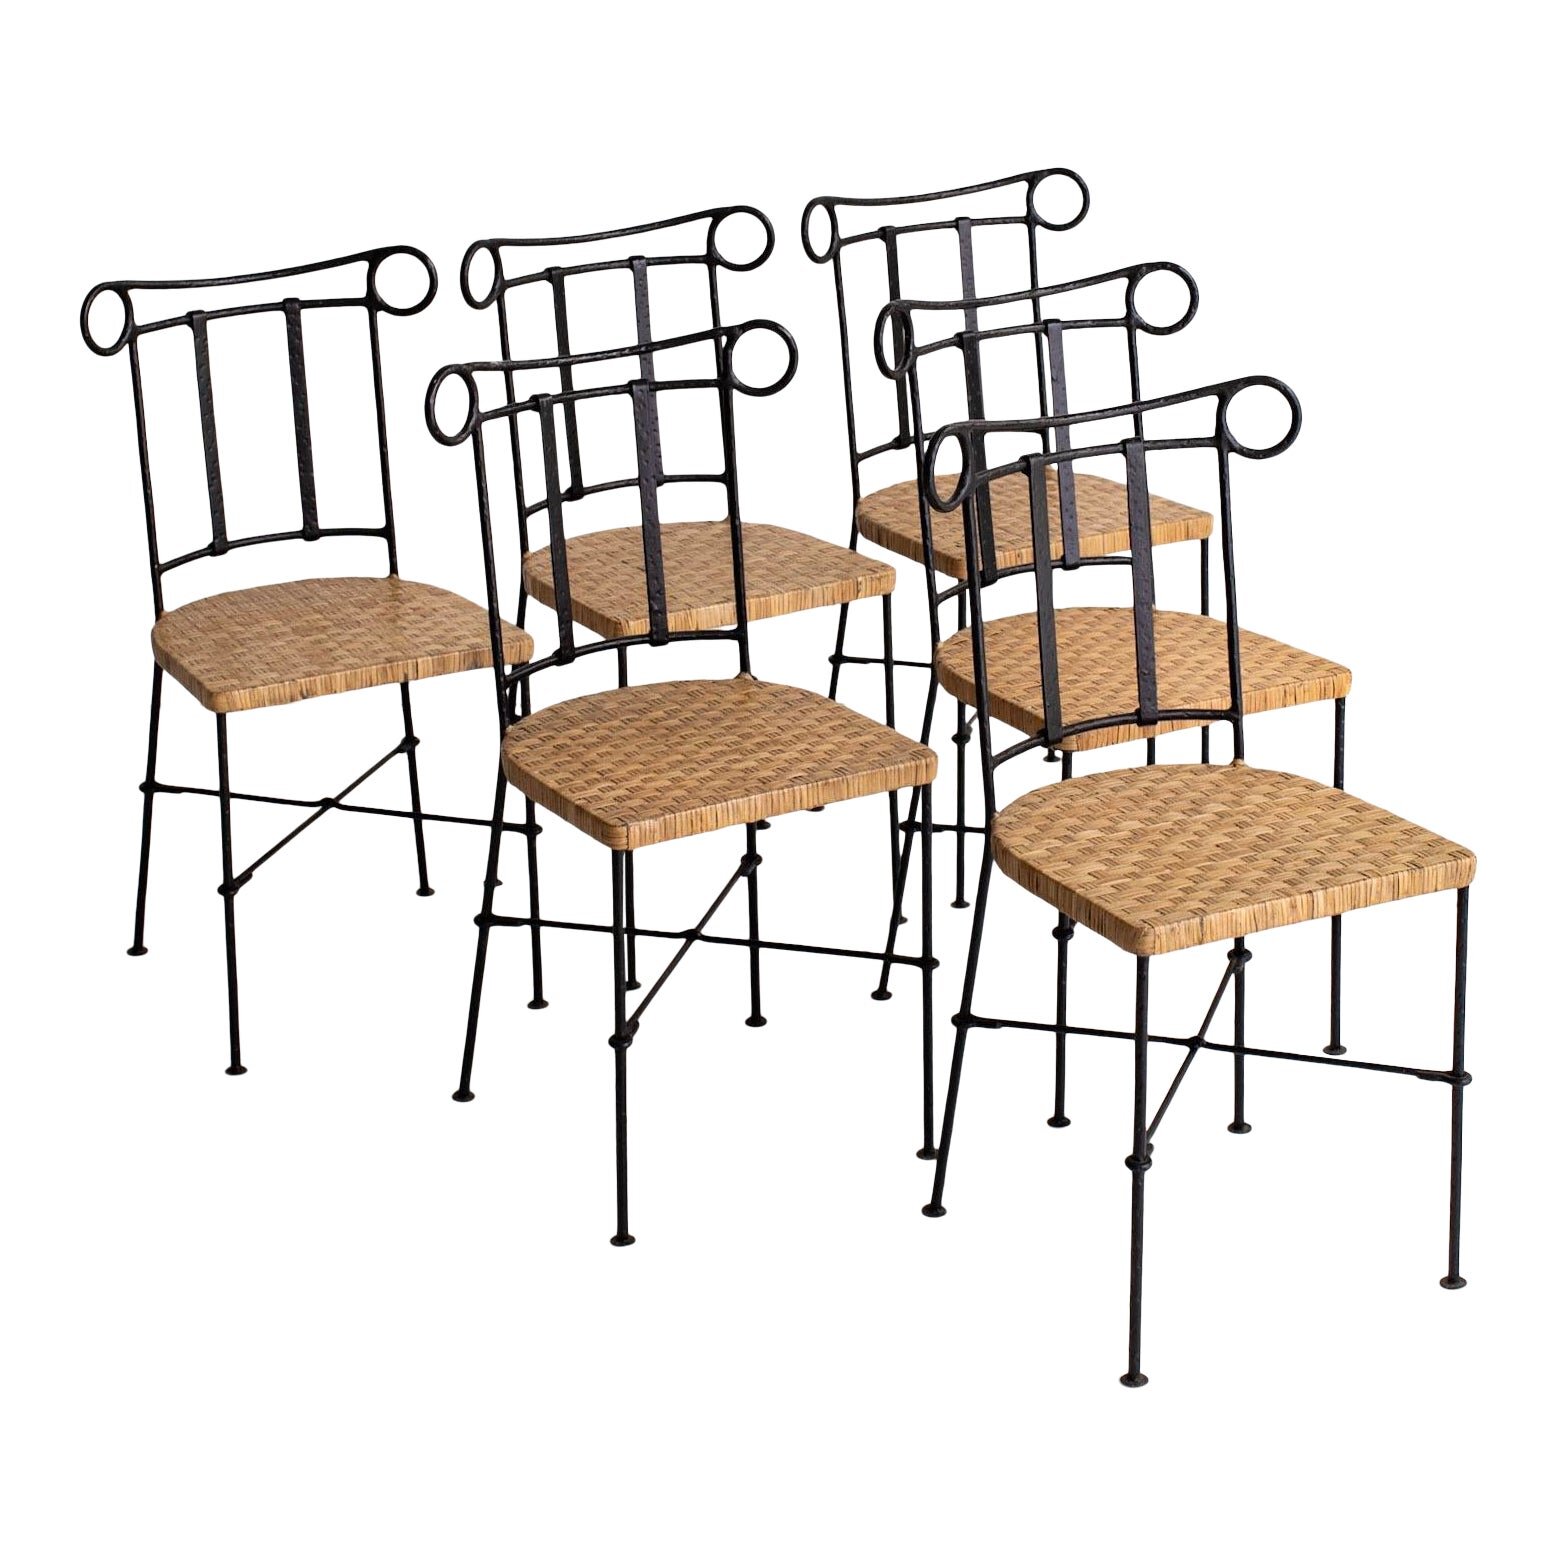 grecian-ionic-column-wrought-iron-and-wicker-chairs-set-of-6-7251.jpeg